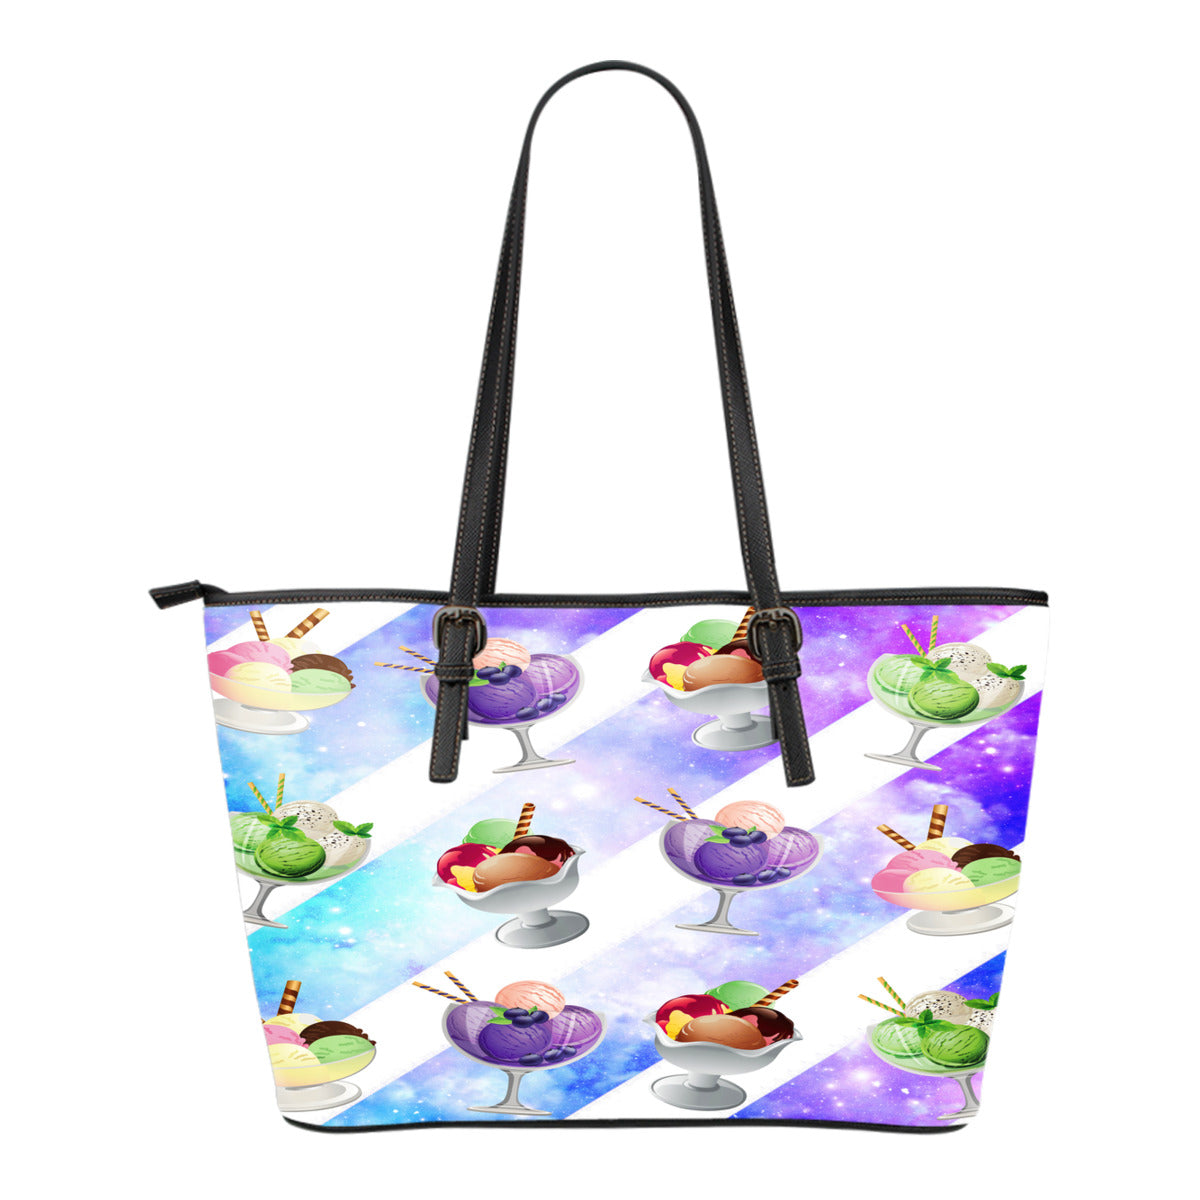 Ice Cream Themed Design C6 Women Small Leather Tote Bag